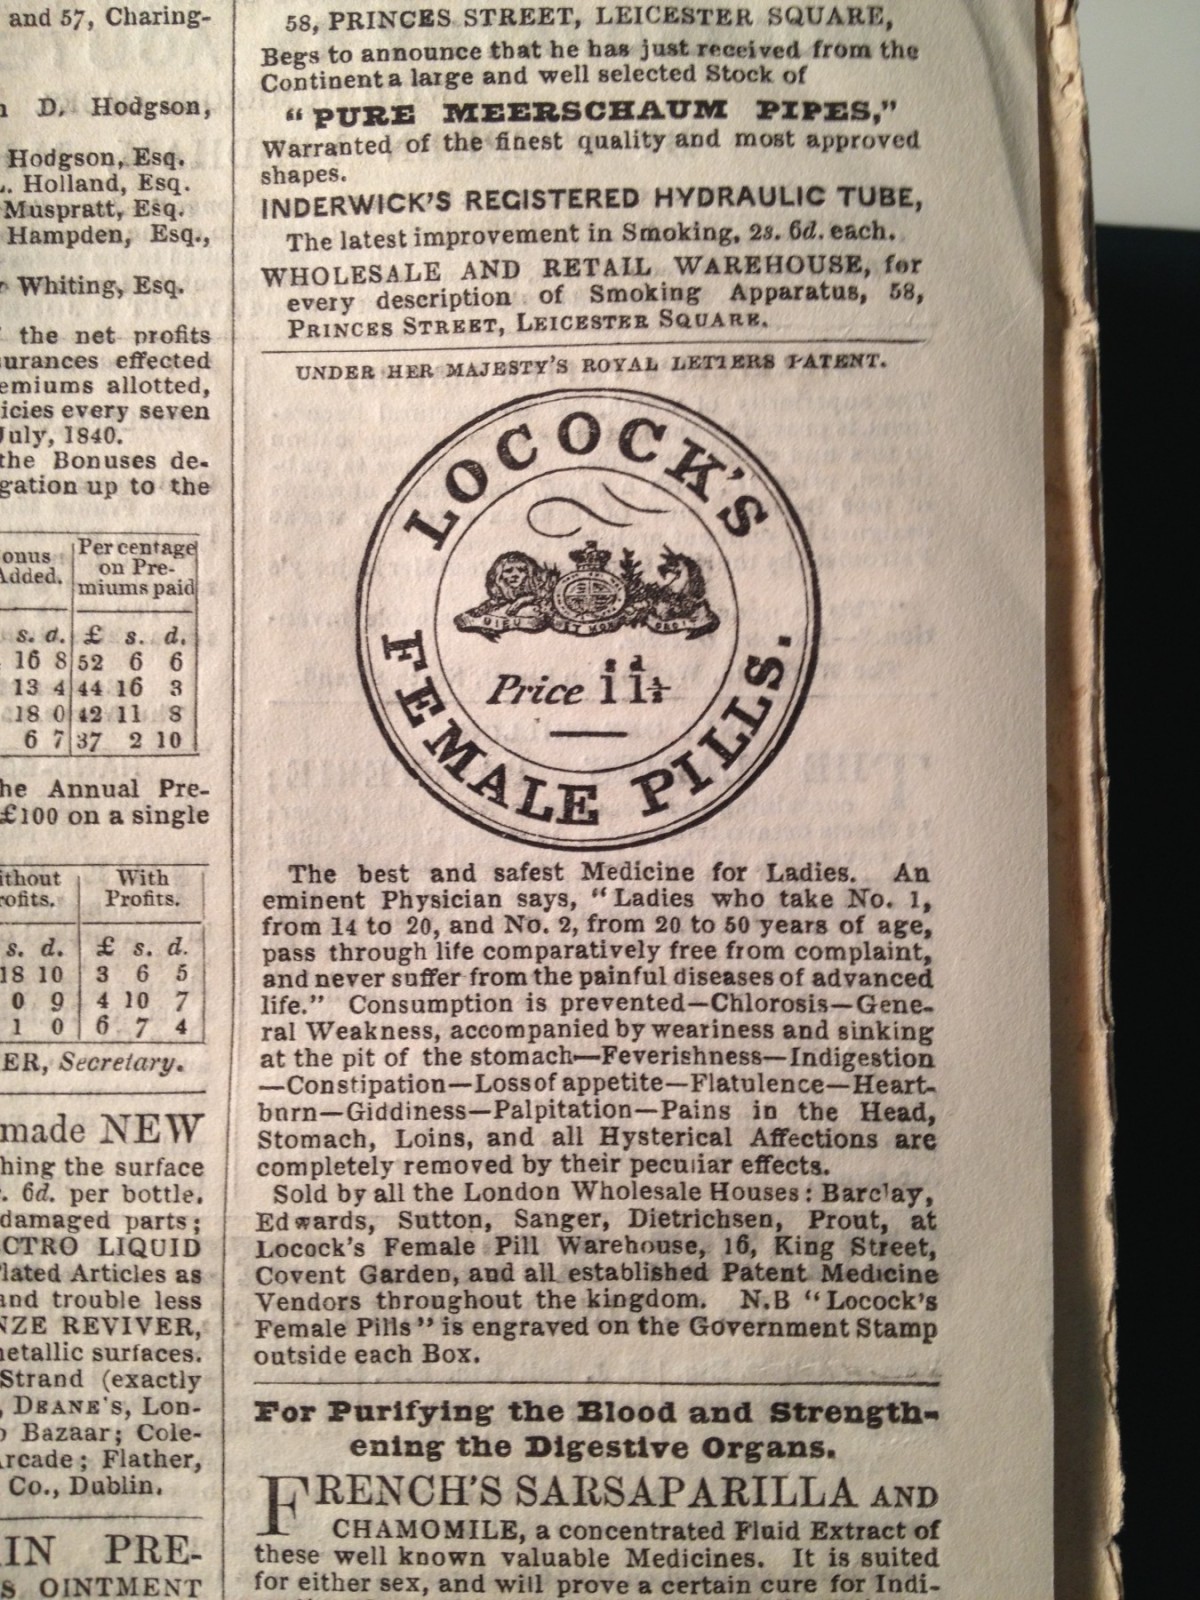 Locock's Female Pills advertised in David Copperfield